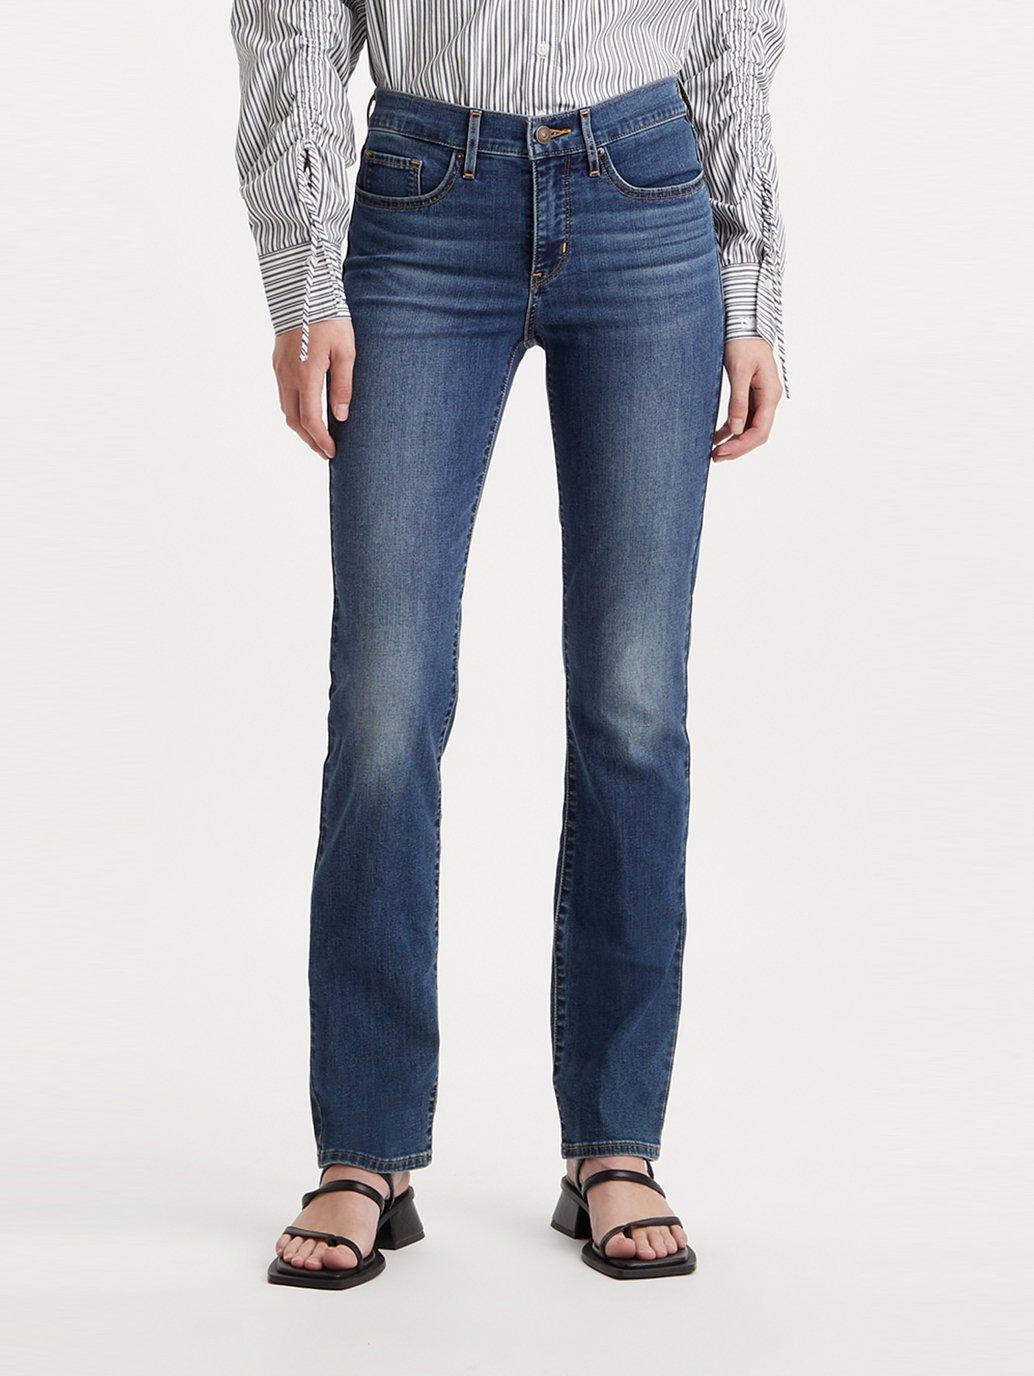 Buy Levi's® Women's 314 Shaping Straight Jeans | Levi’s® Official ...